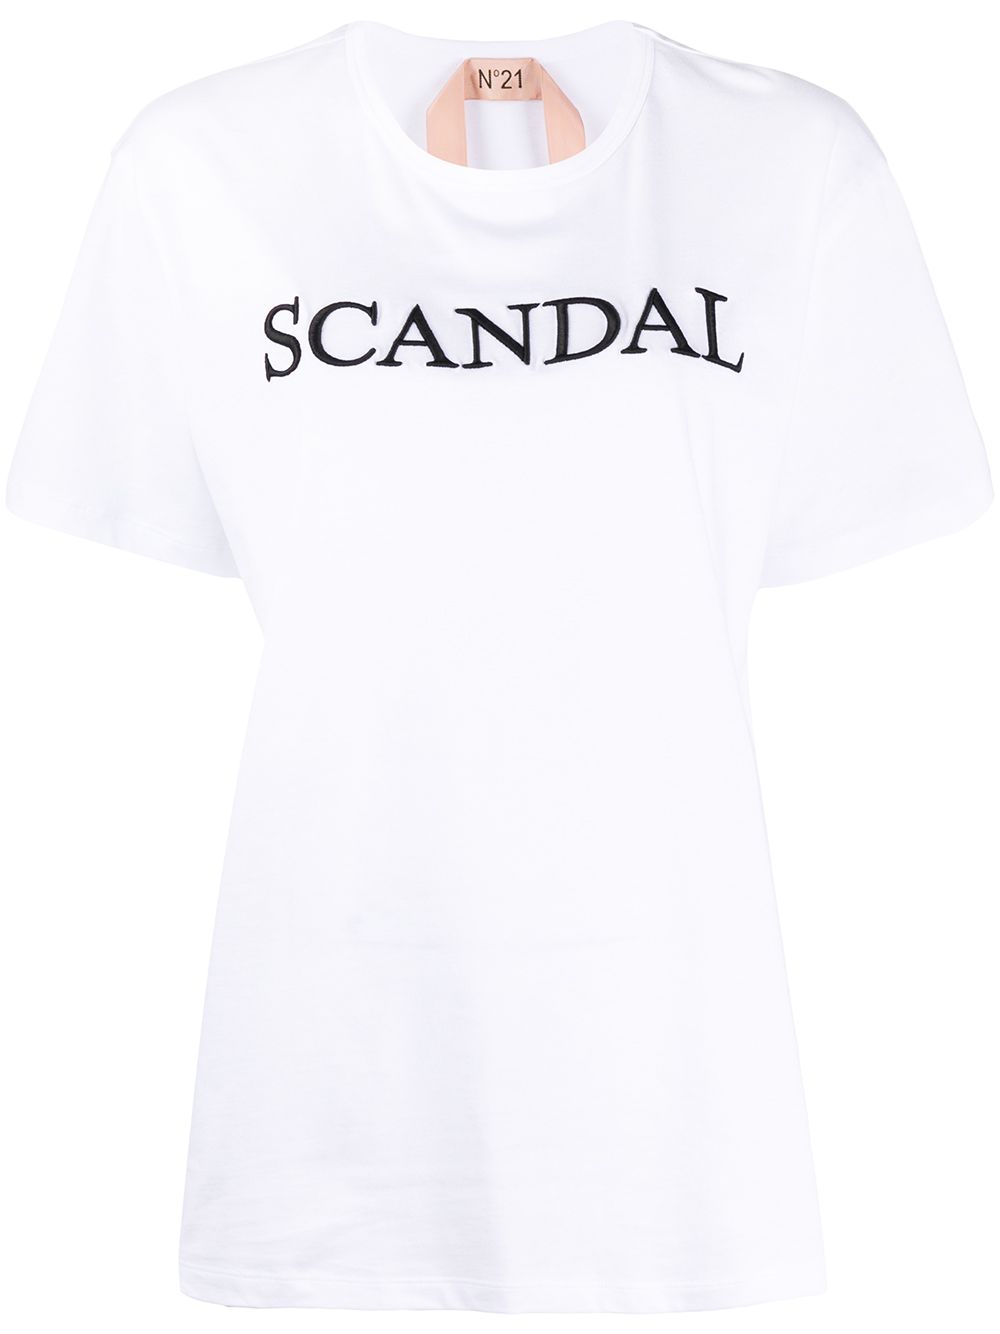 N°21 Scandal Embroidered T-shirt In White